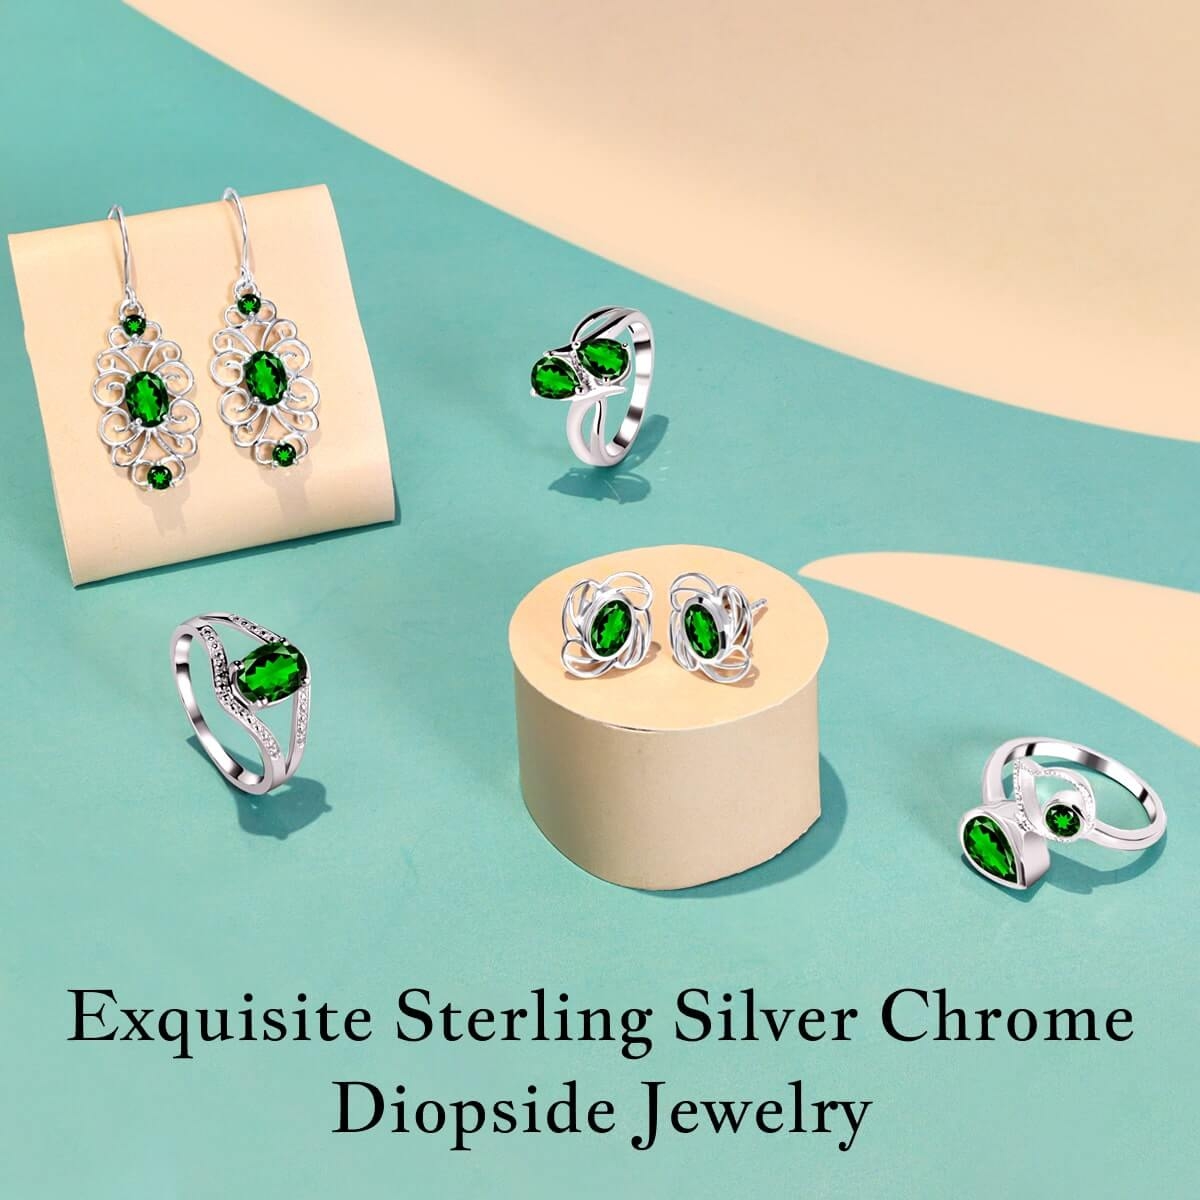 Chrome Diopside Sterling Silver Jewelry Collection